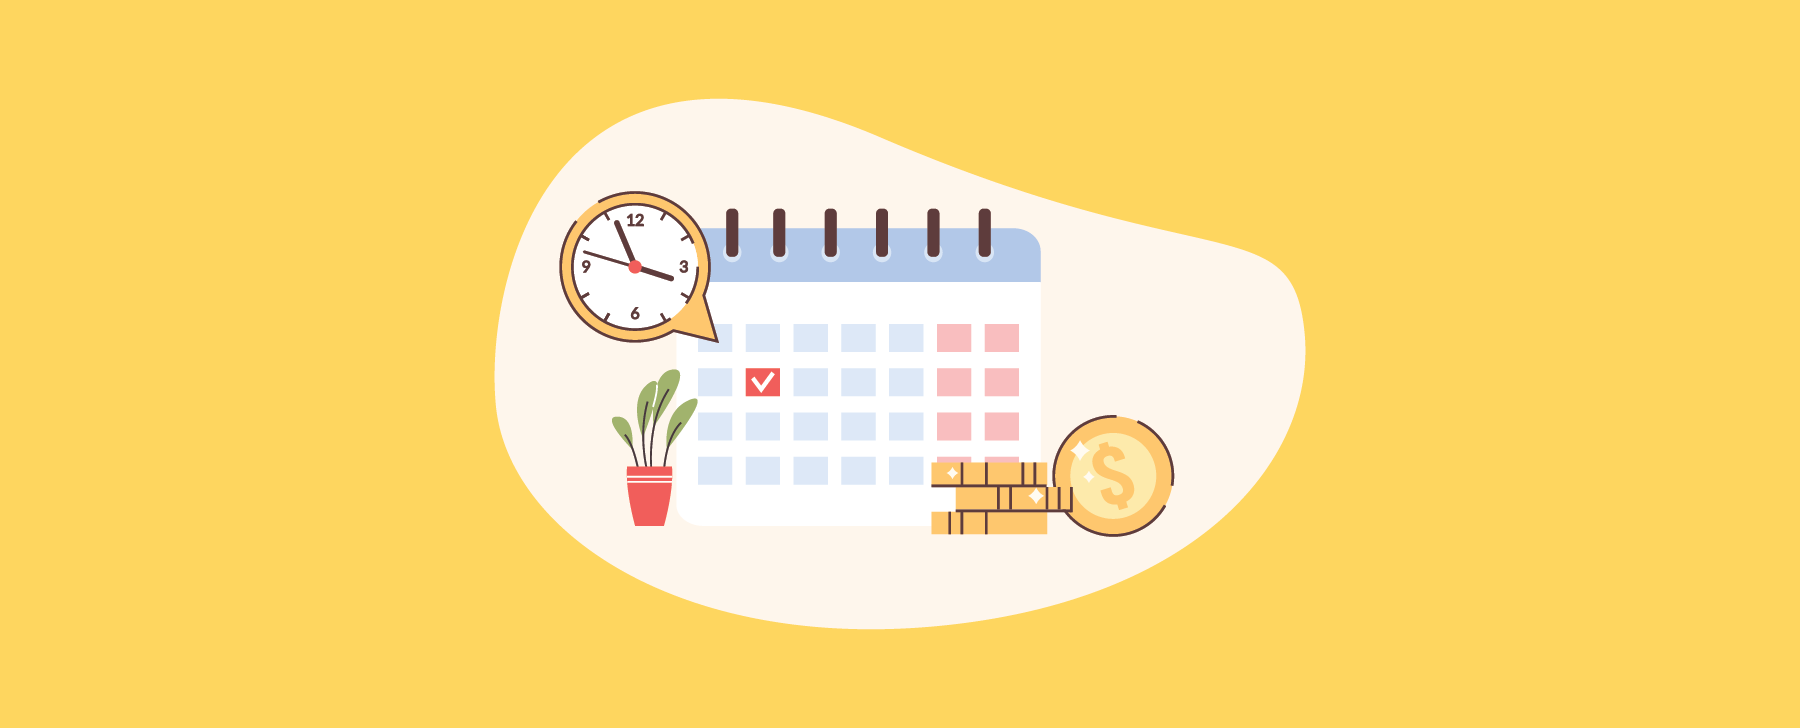 Event Budgeting: Tips for a Memorable, Cost-Effective Event